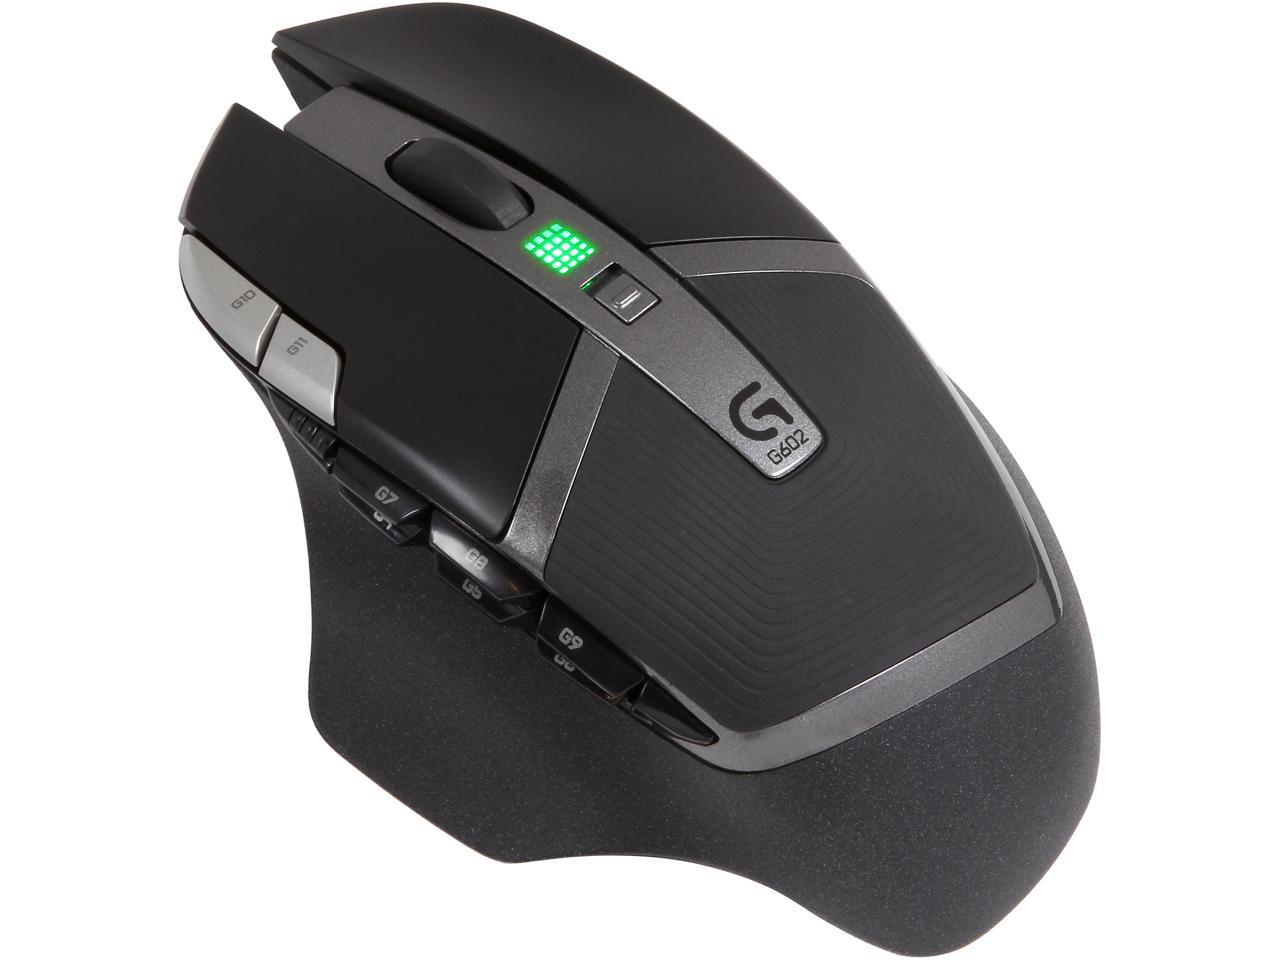 Up to 2500 DPI G602 Lag-Free Wireless Gaming Mouse  11 Programmable Buttons 